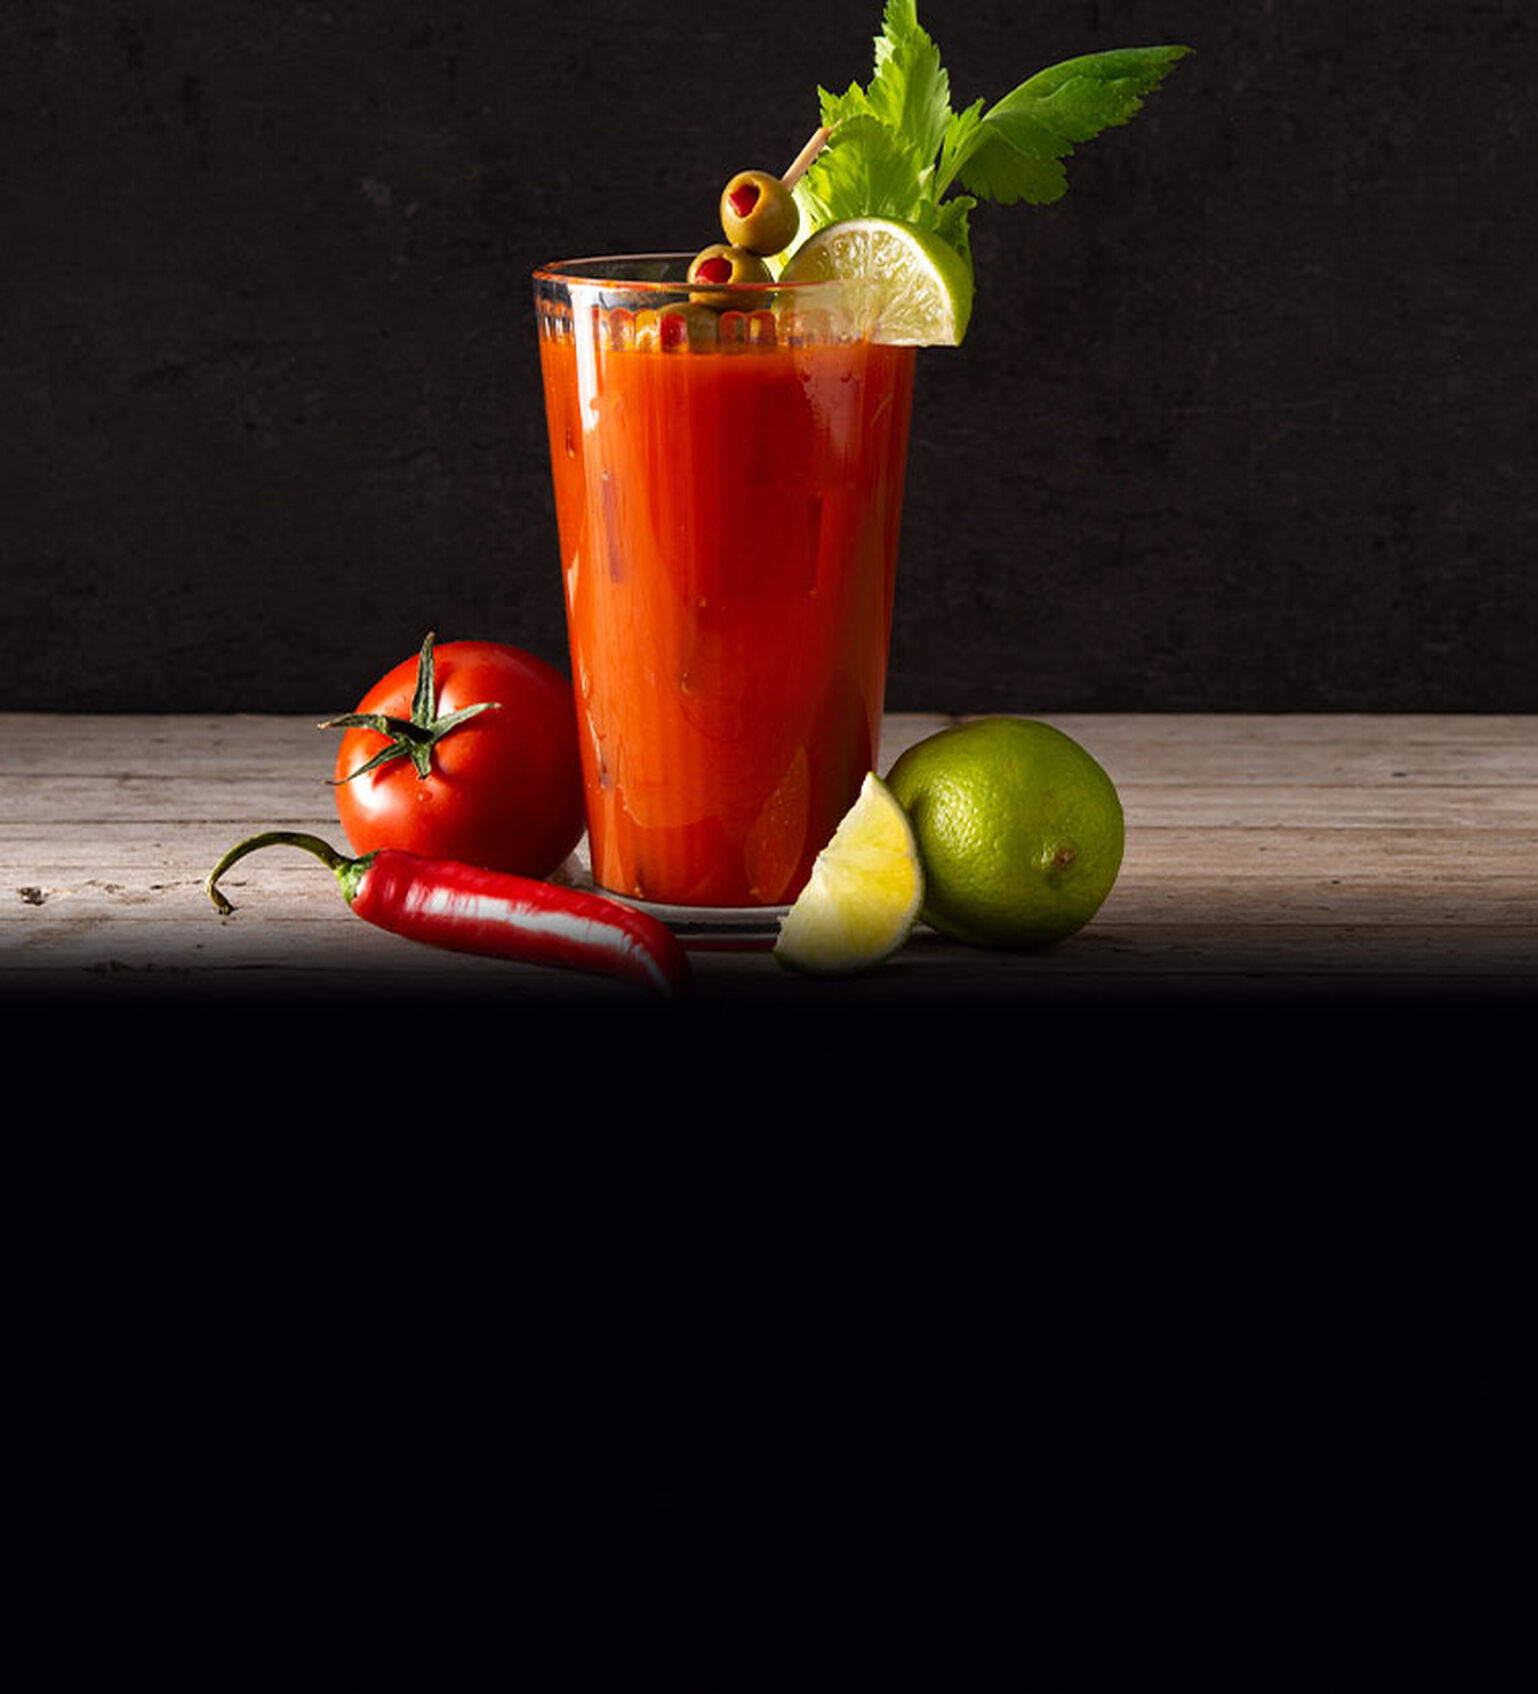 Image of a Bloody Mary cocktail on a butcher block counter